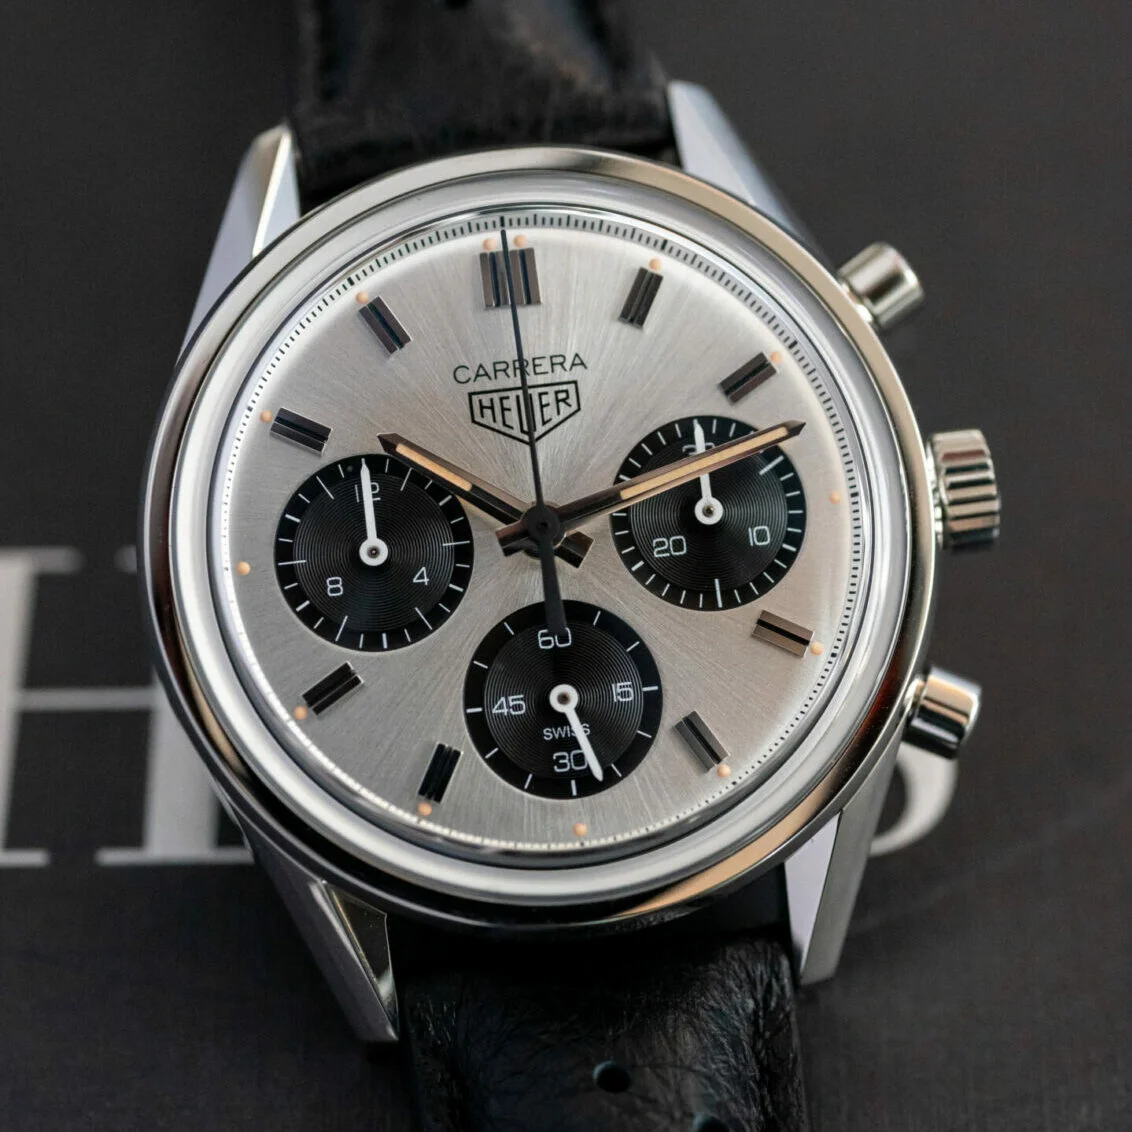 The TAG Heuer Carrera - an in-depth history